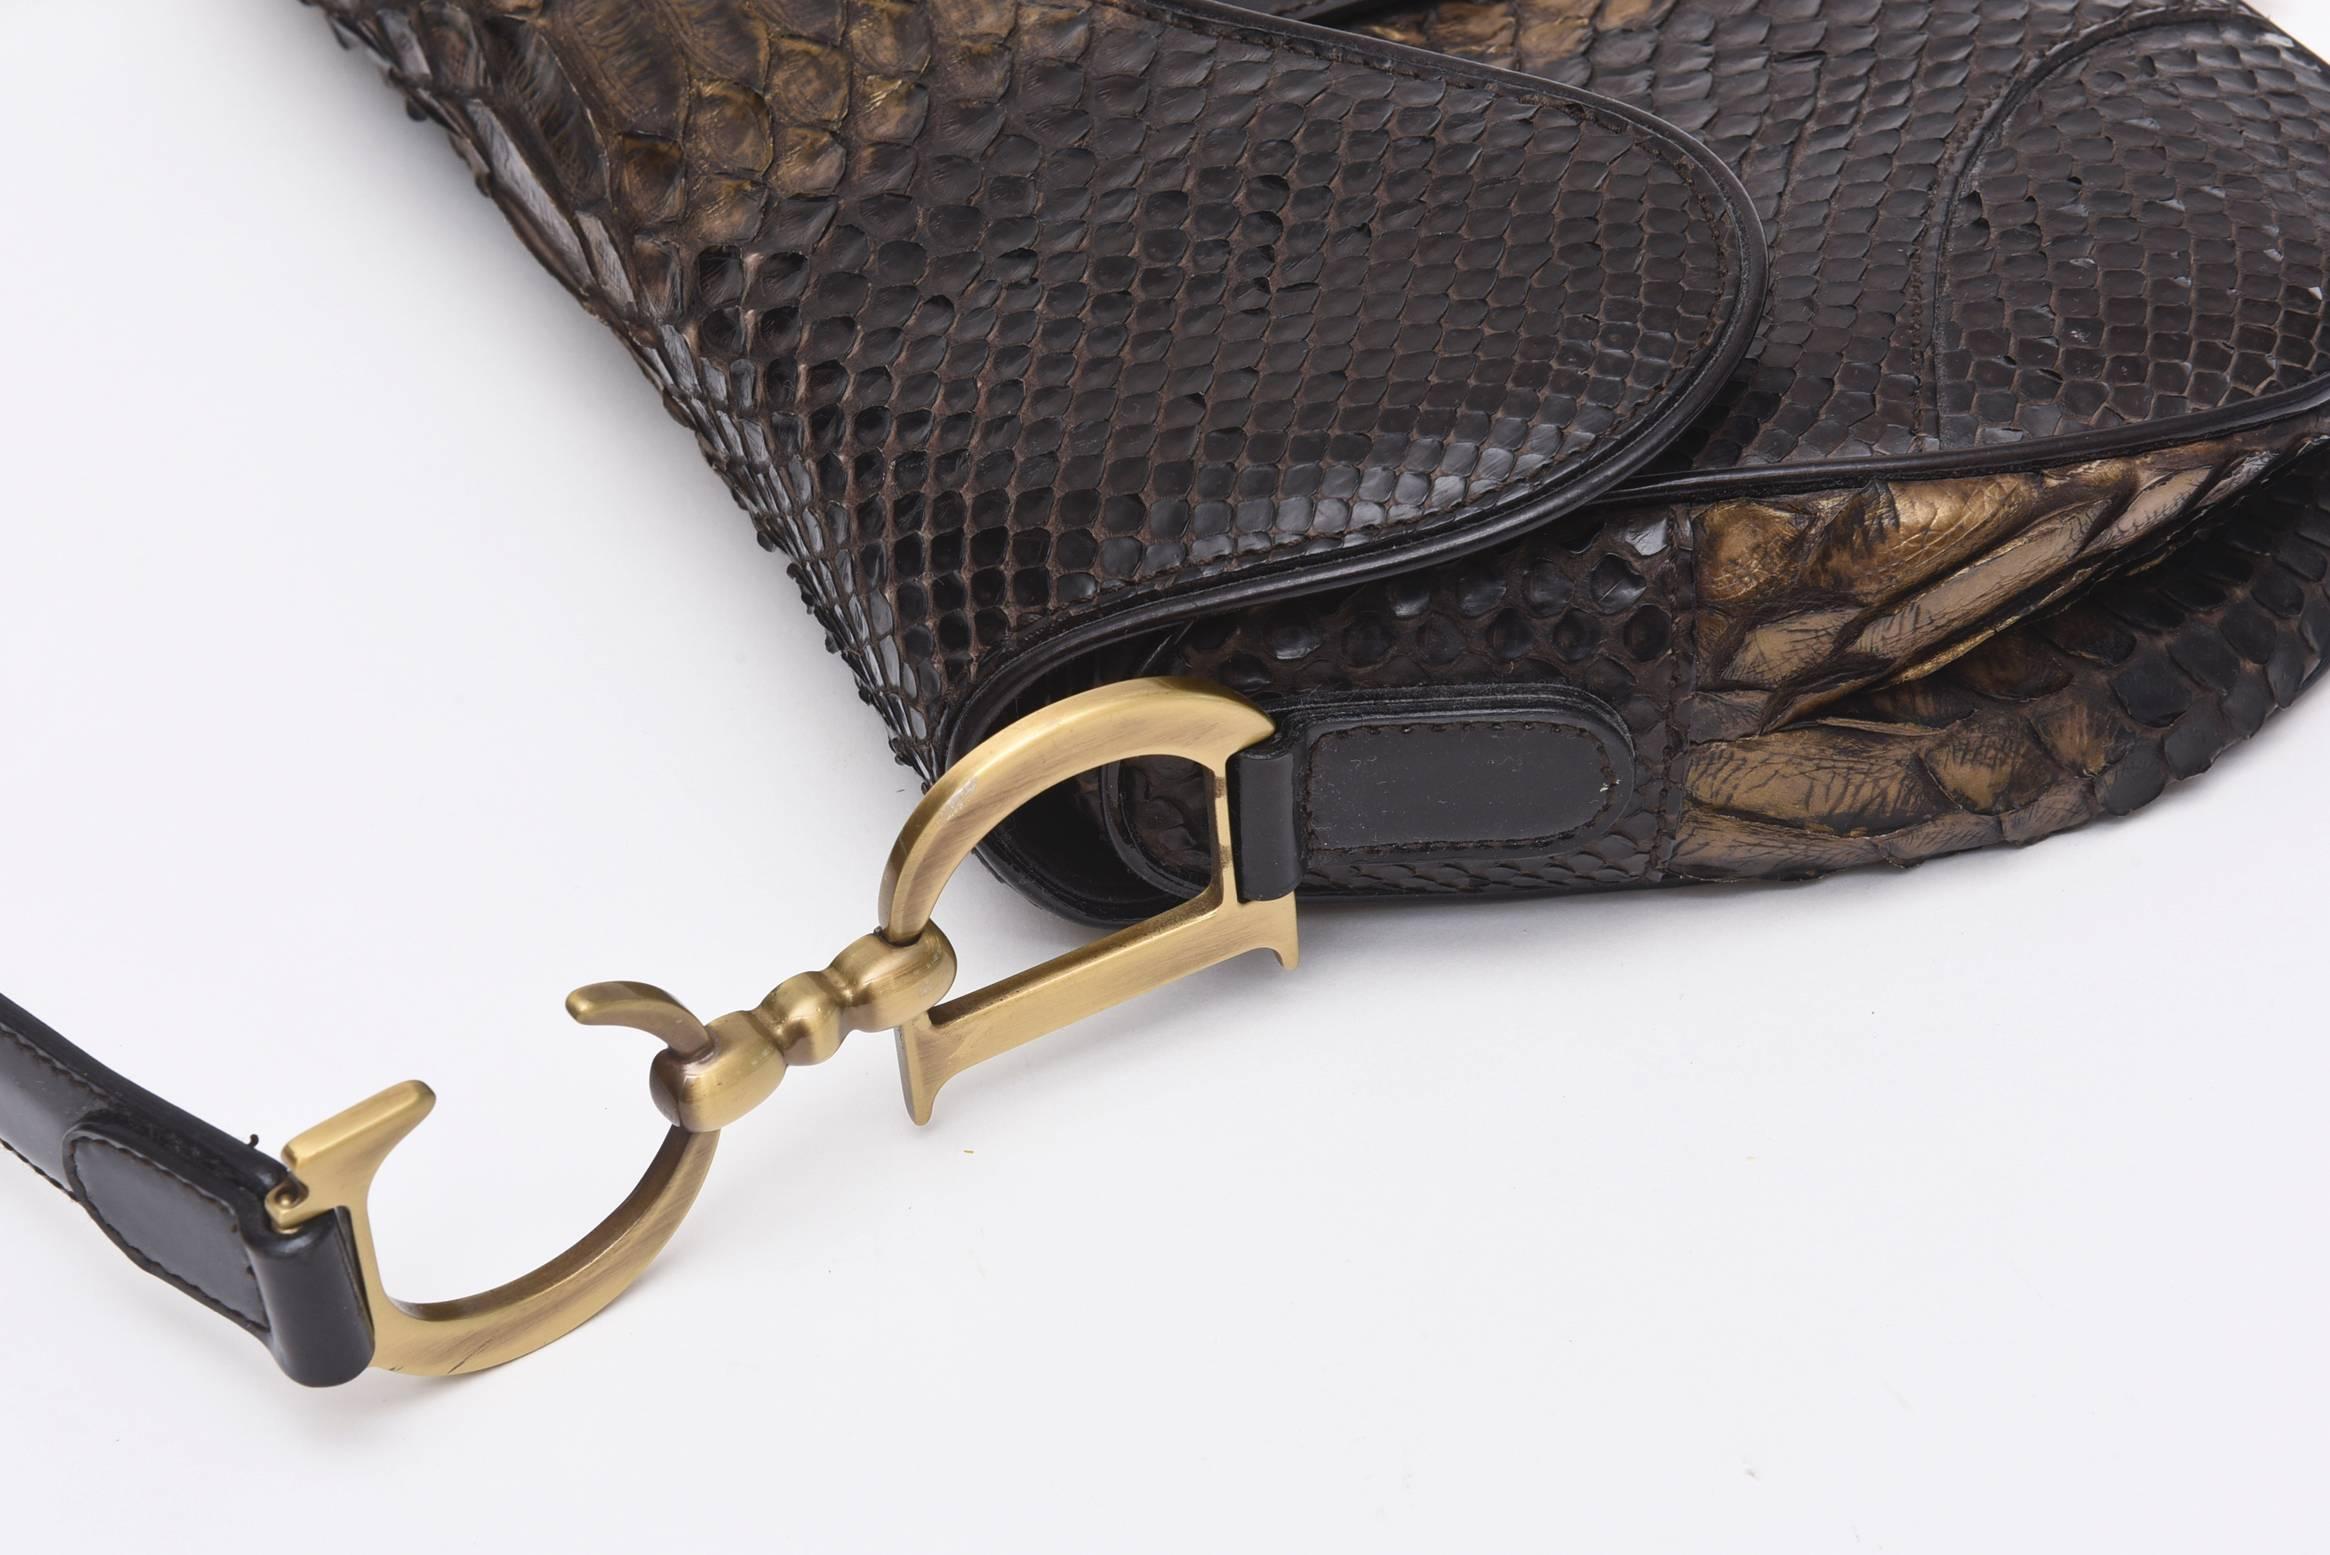 Women's Early Limited Edition John Galliano for Christian Dior Python Saddle Bag / SALE